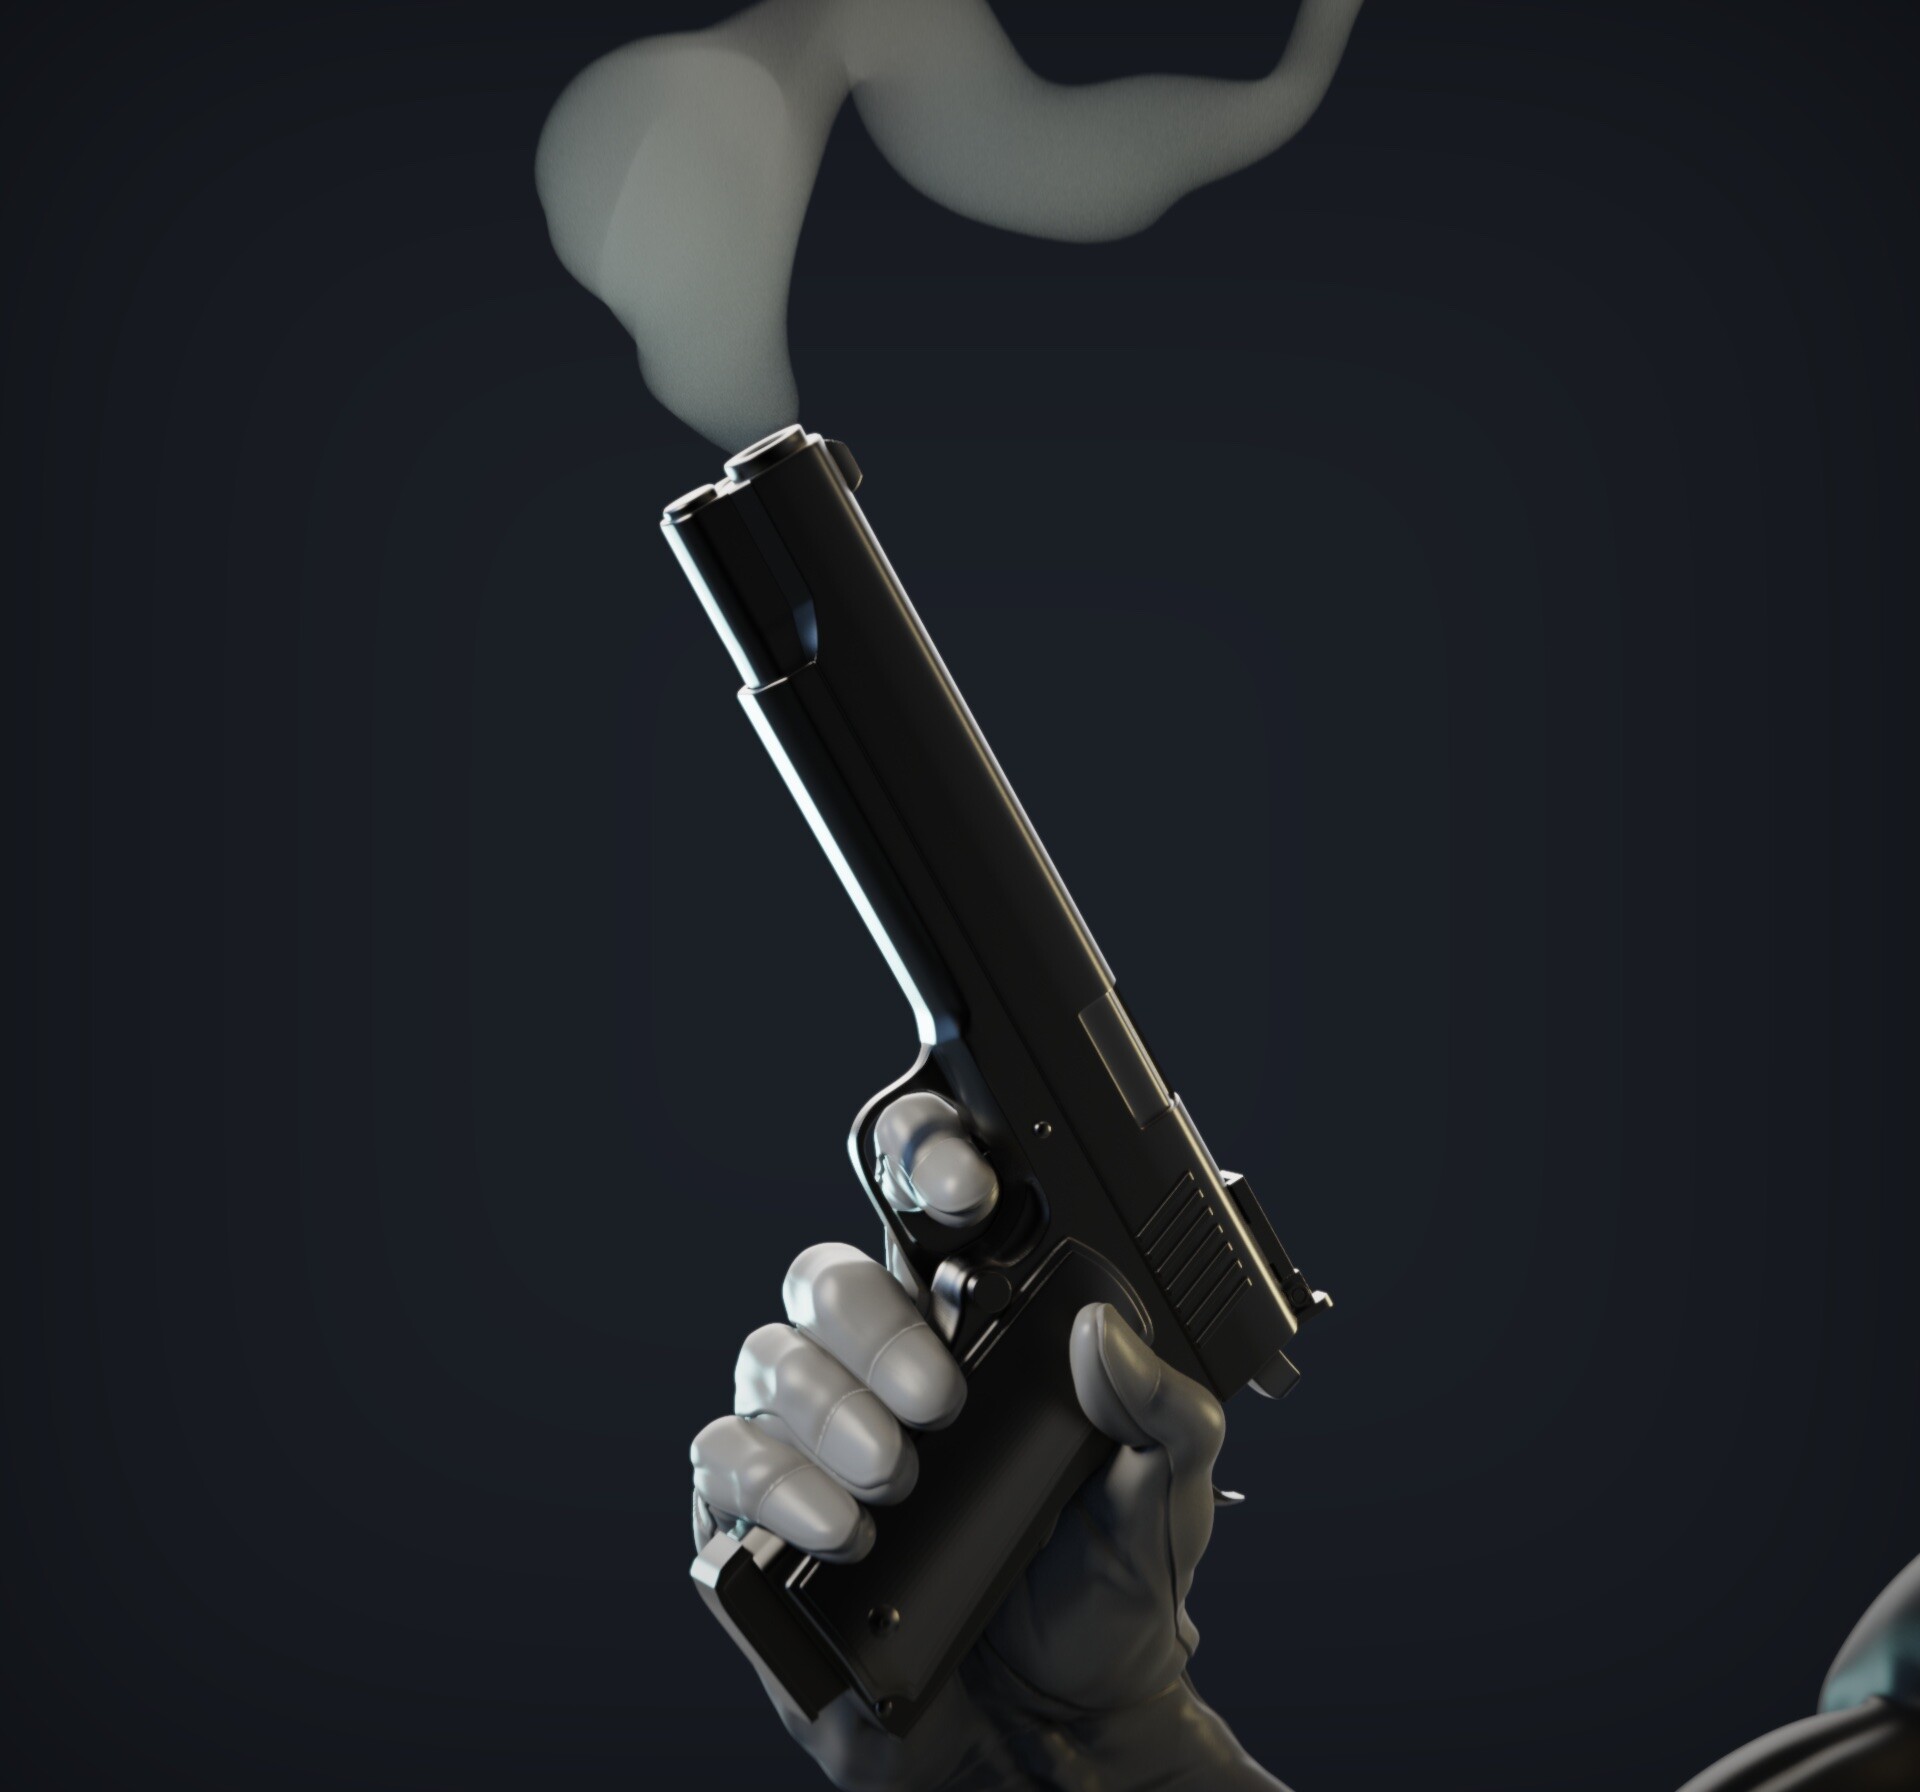 Oficina Steam::The Punisher with discreet smoke